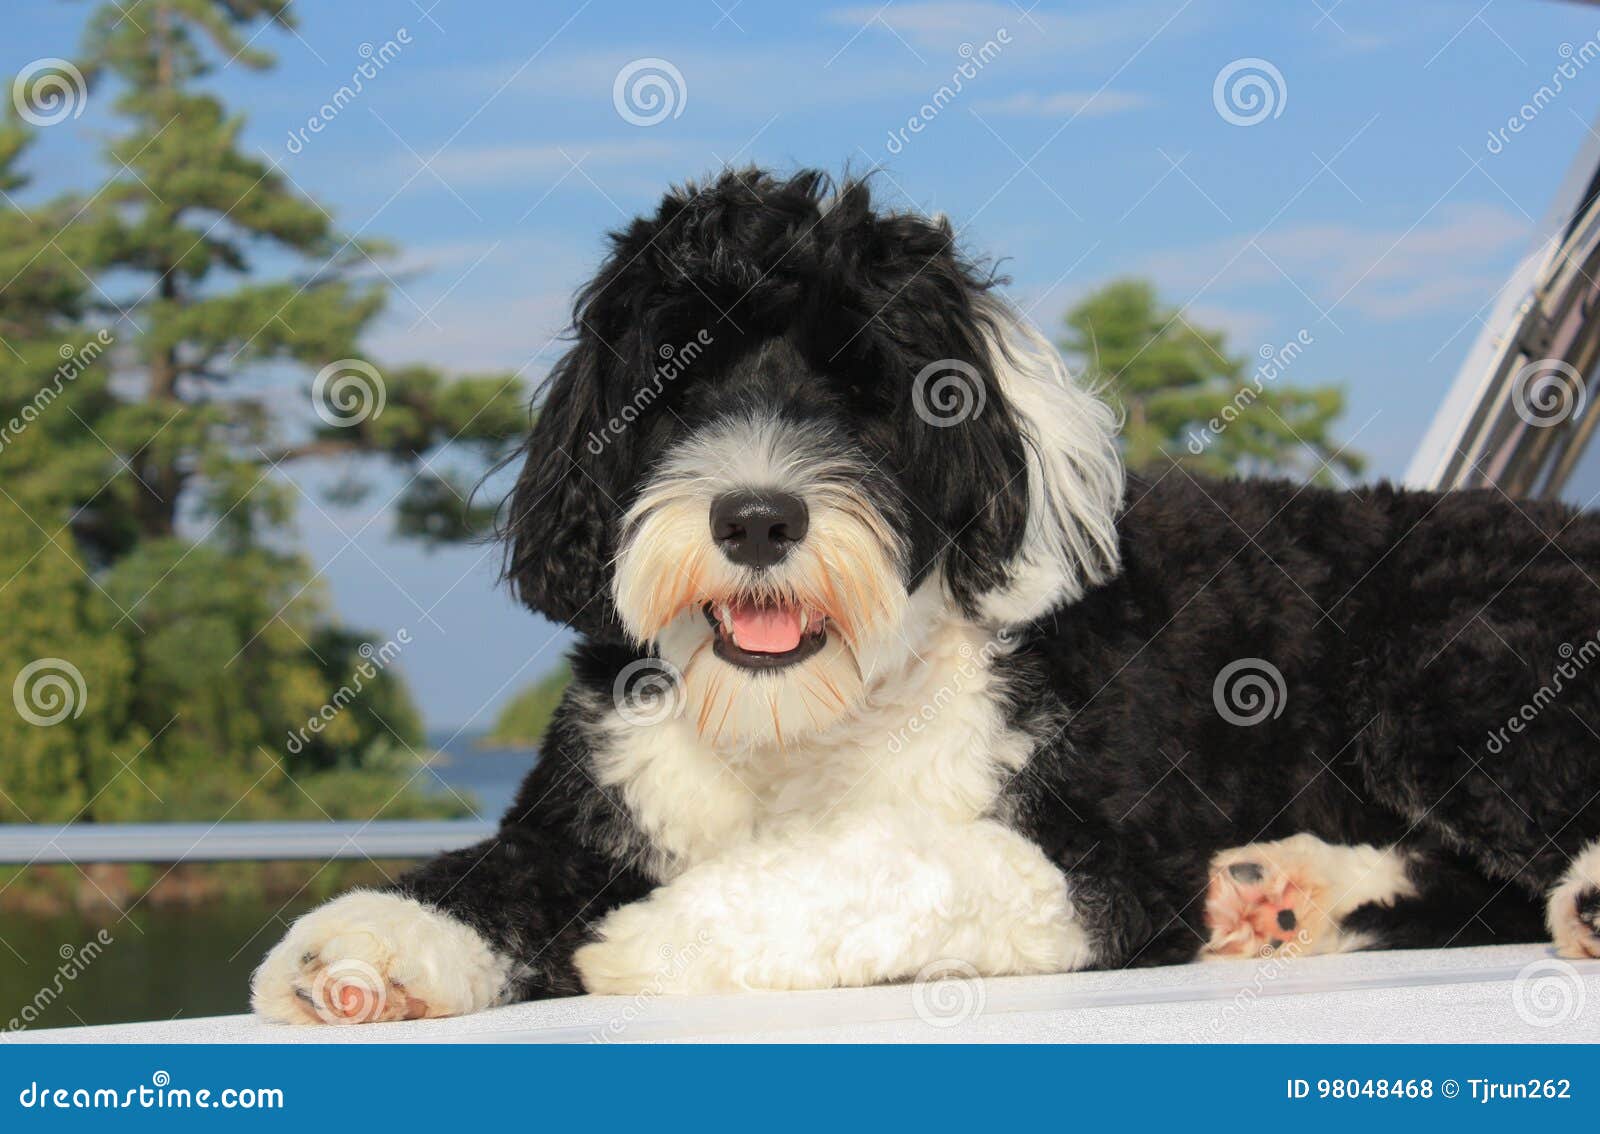 Black And White Portuguese Water Dog Lounging On A Boat On The L Stock Photo Image Of Summer Daytime 98048468